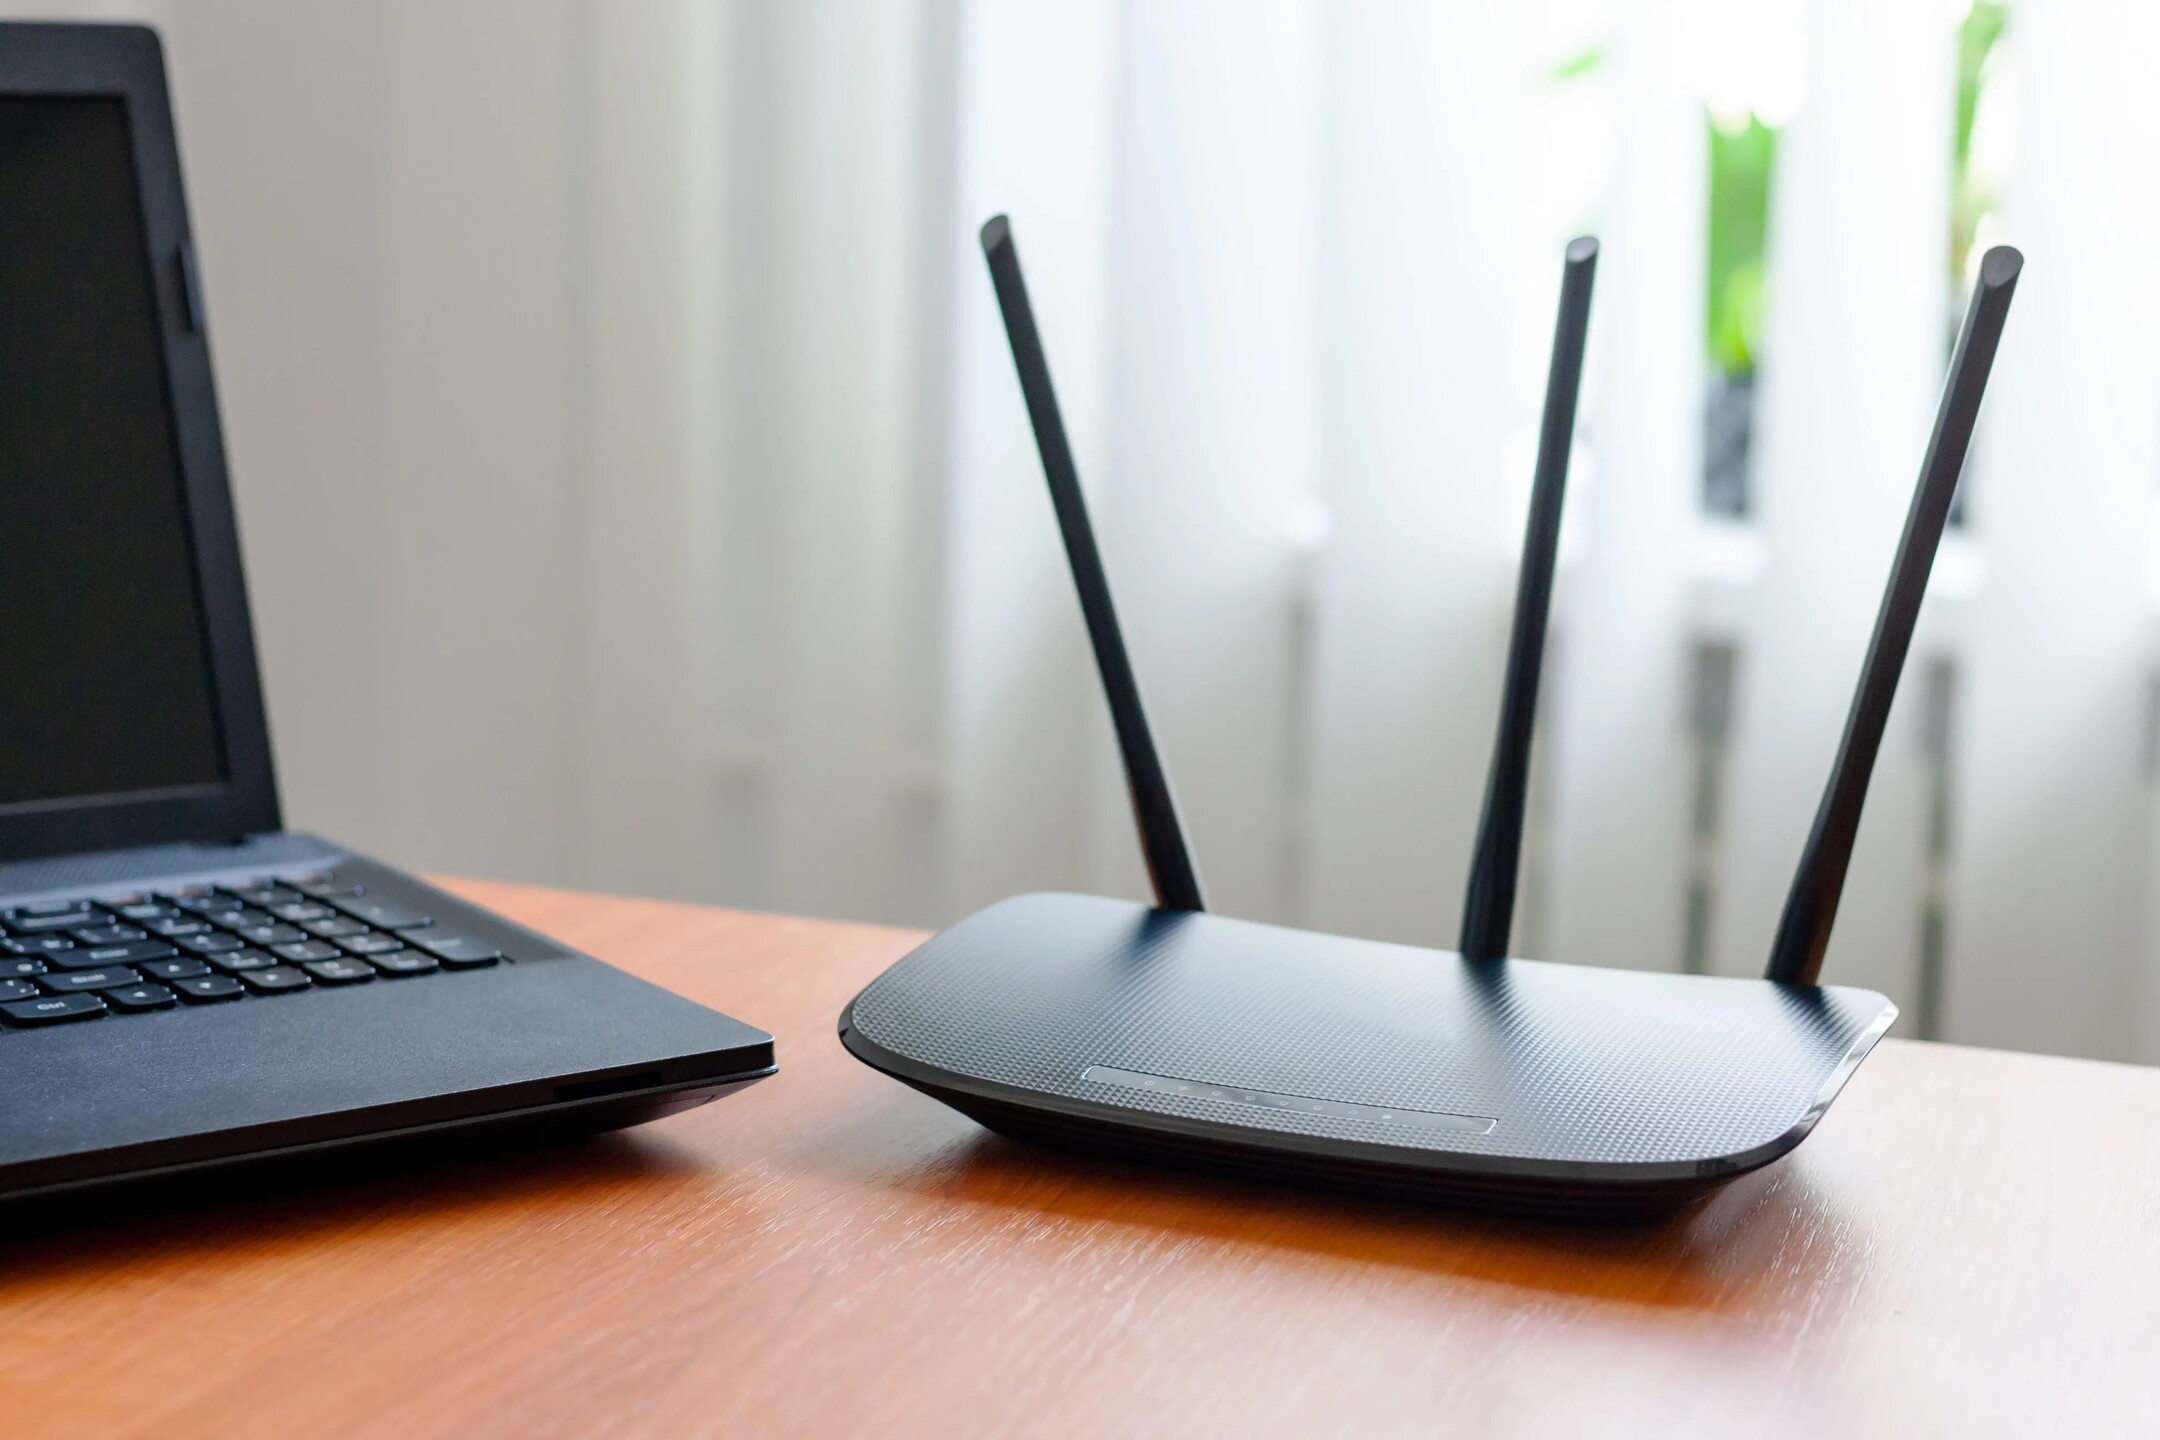 How To Block Devices Connected To My Wi-Fi Router